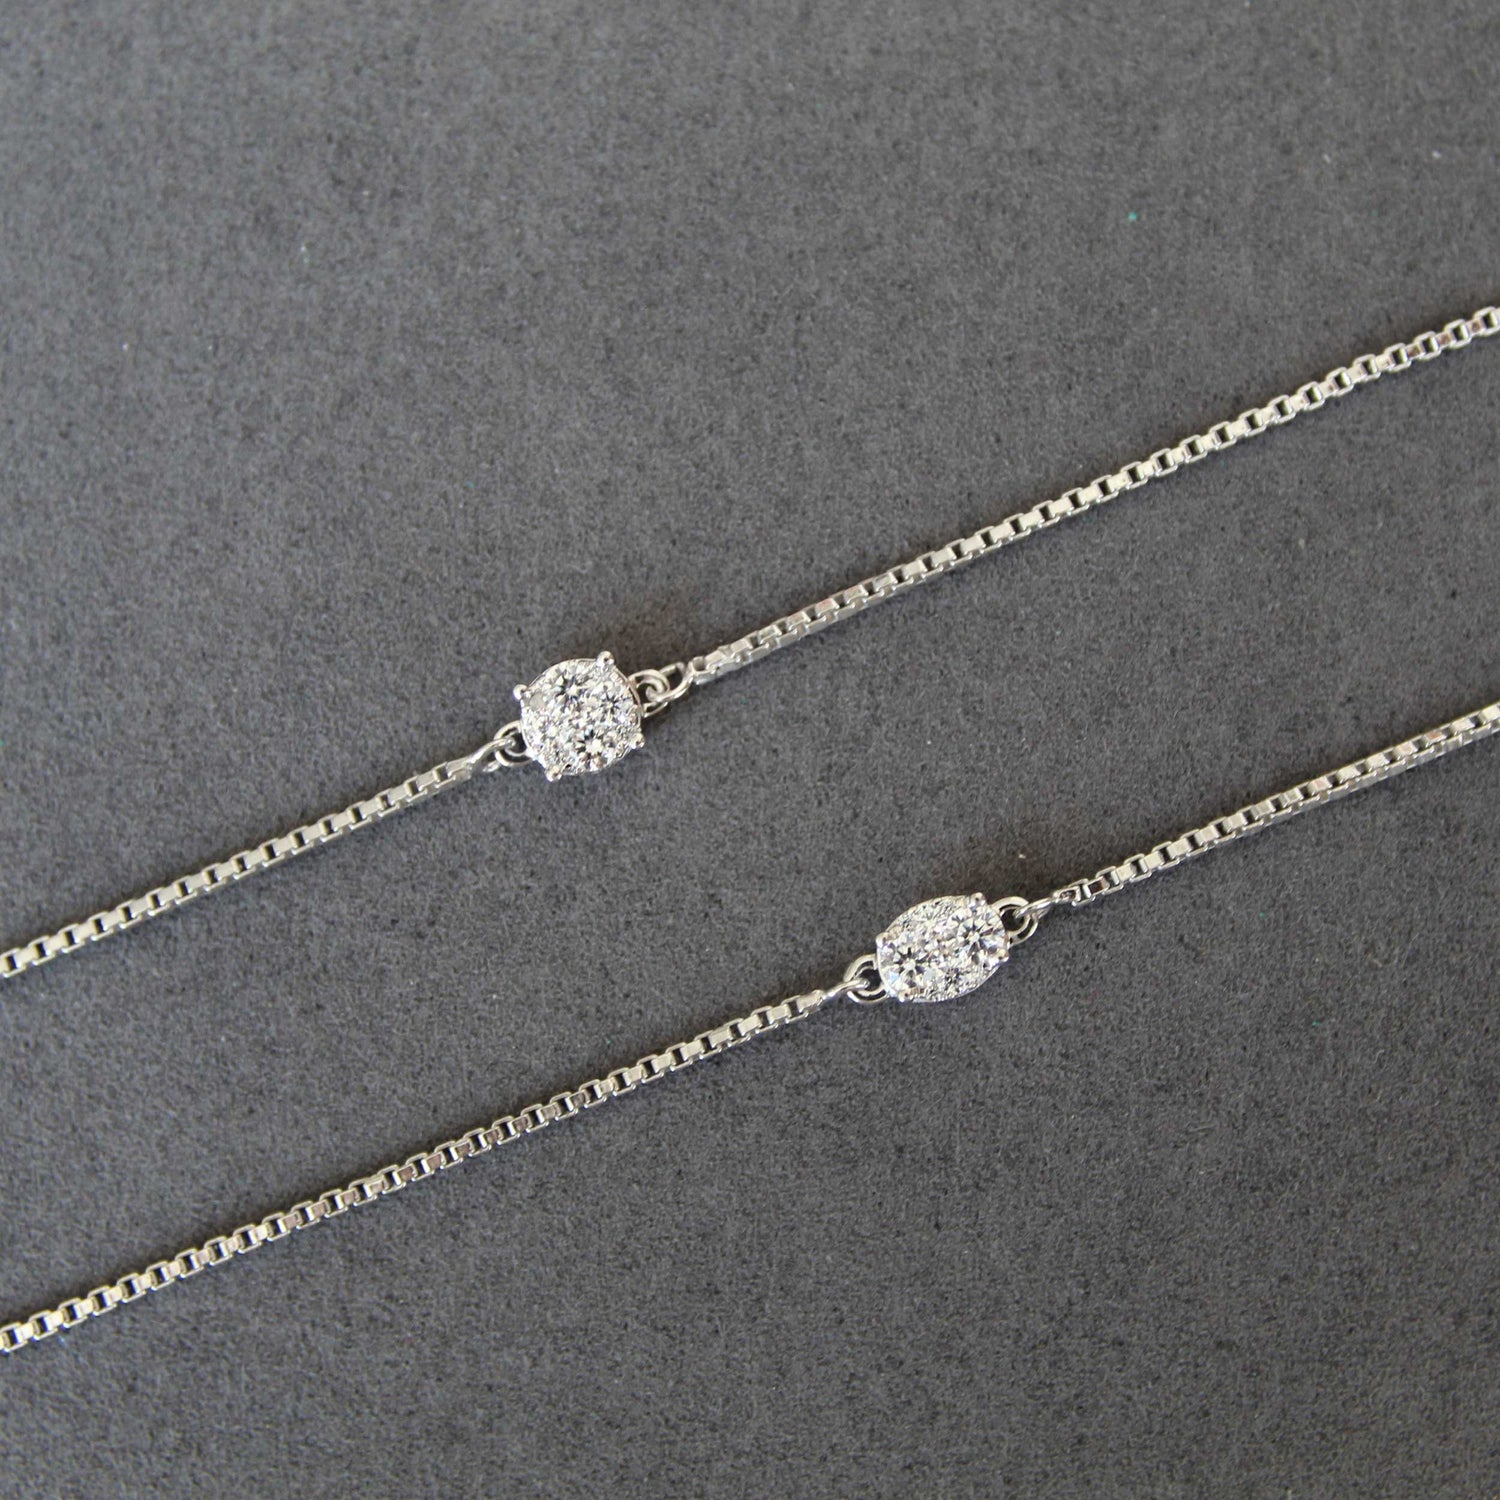 1/4 Cttw Diamond Round Cluster Adjustable Chain Bracelet in 925 Sterling Silver